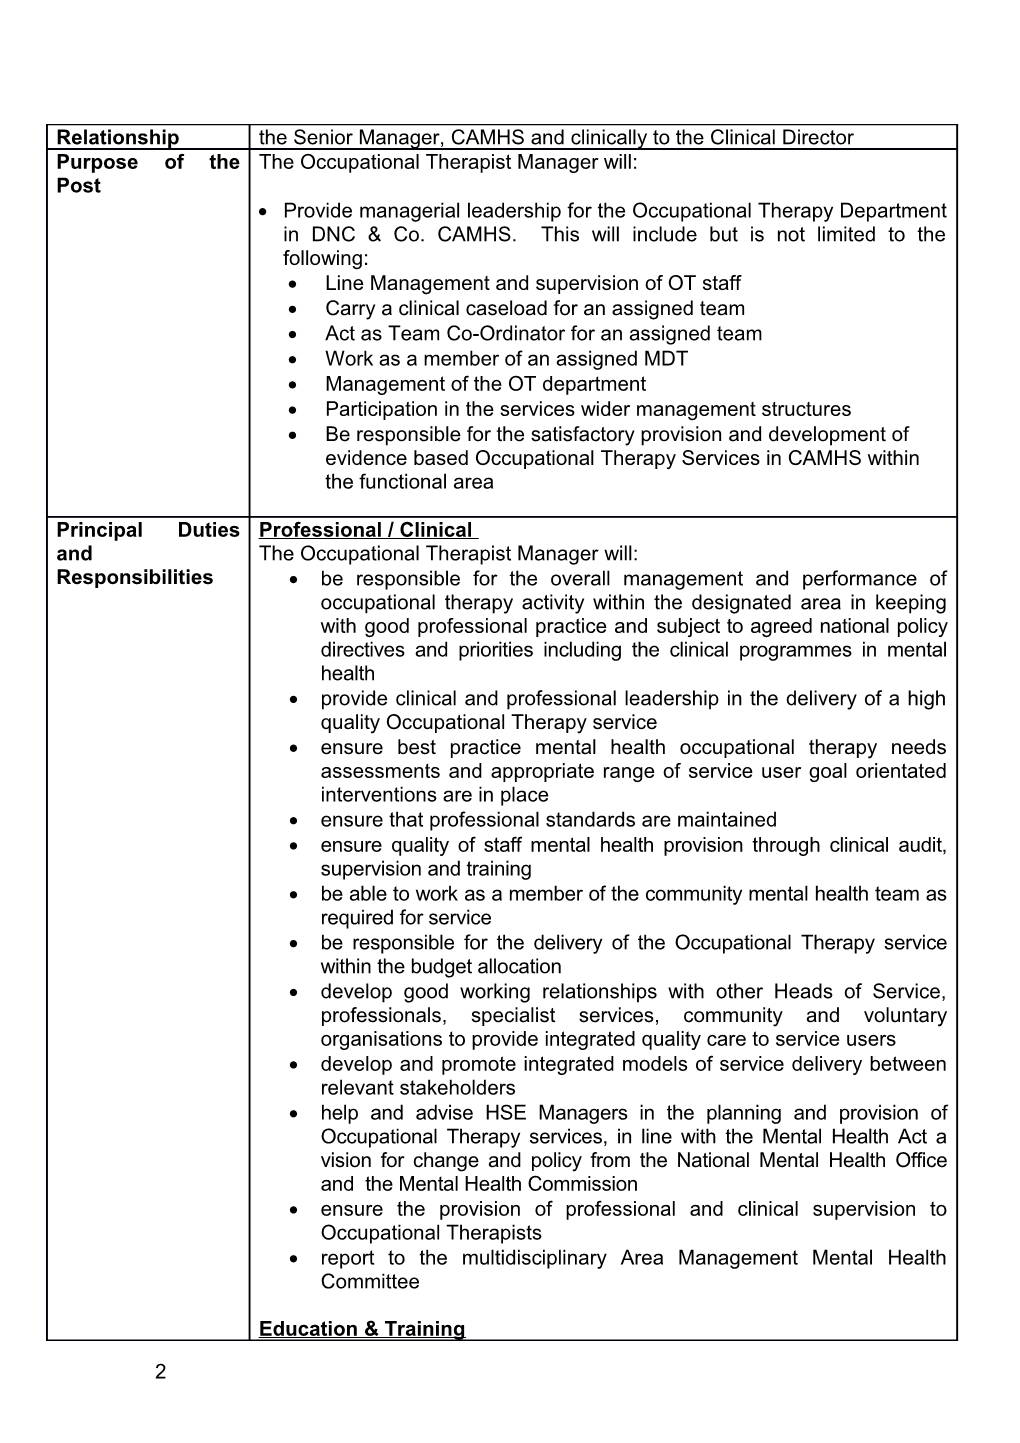 Job Specification & Terms and Conditions s8